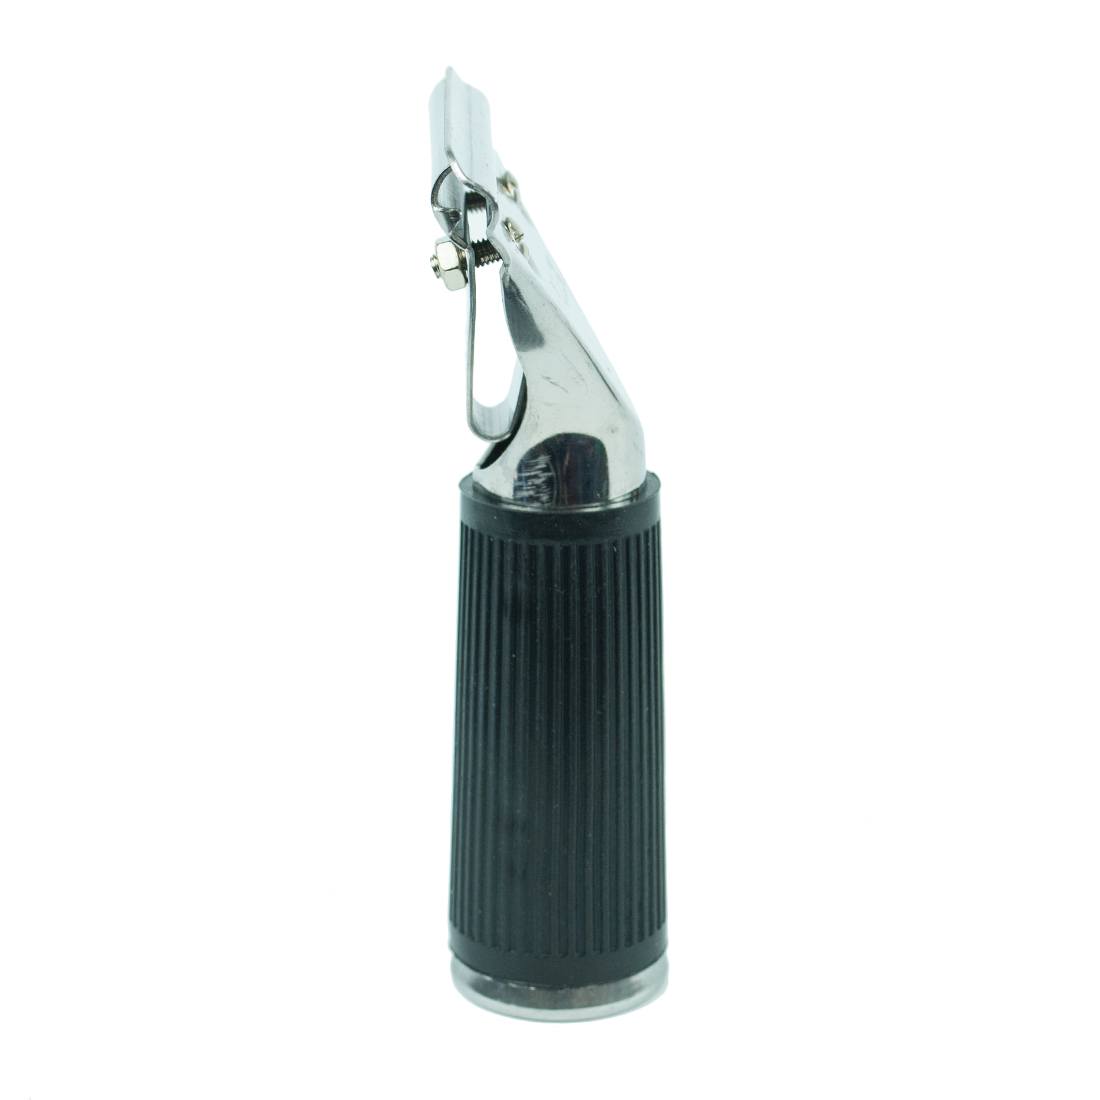 Pulex Stainless Steel Squeegee Handle with Rubber Grip - Left Side View